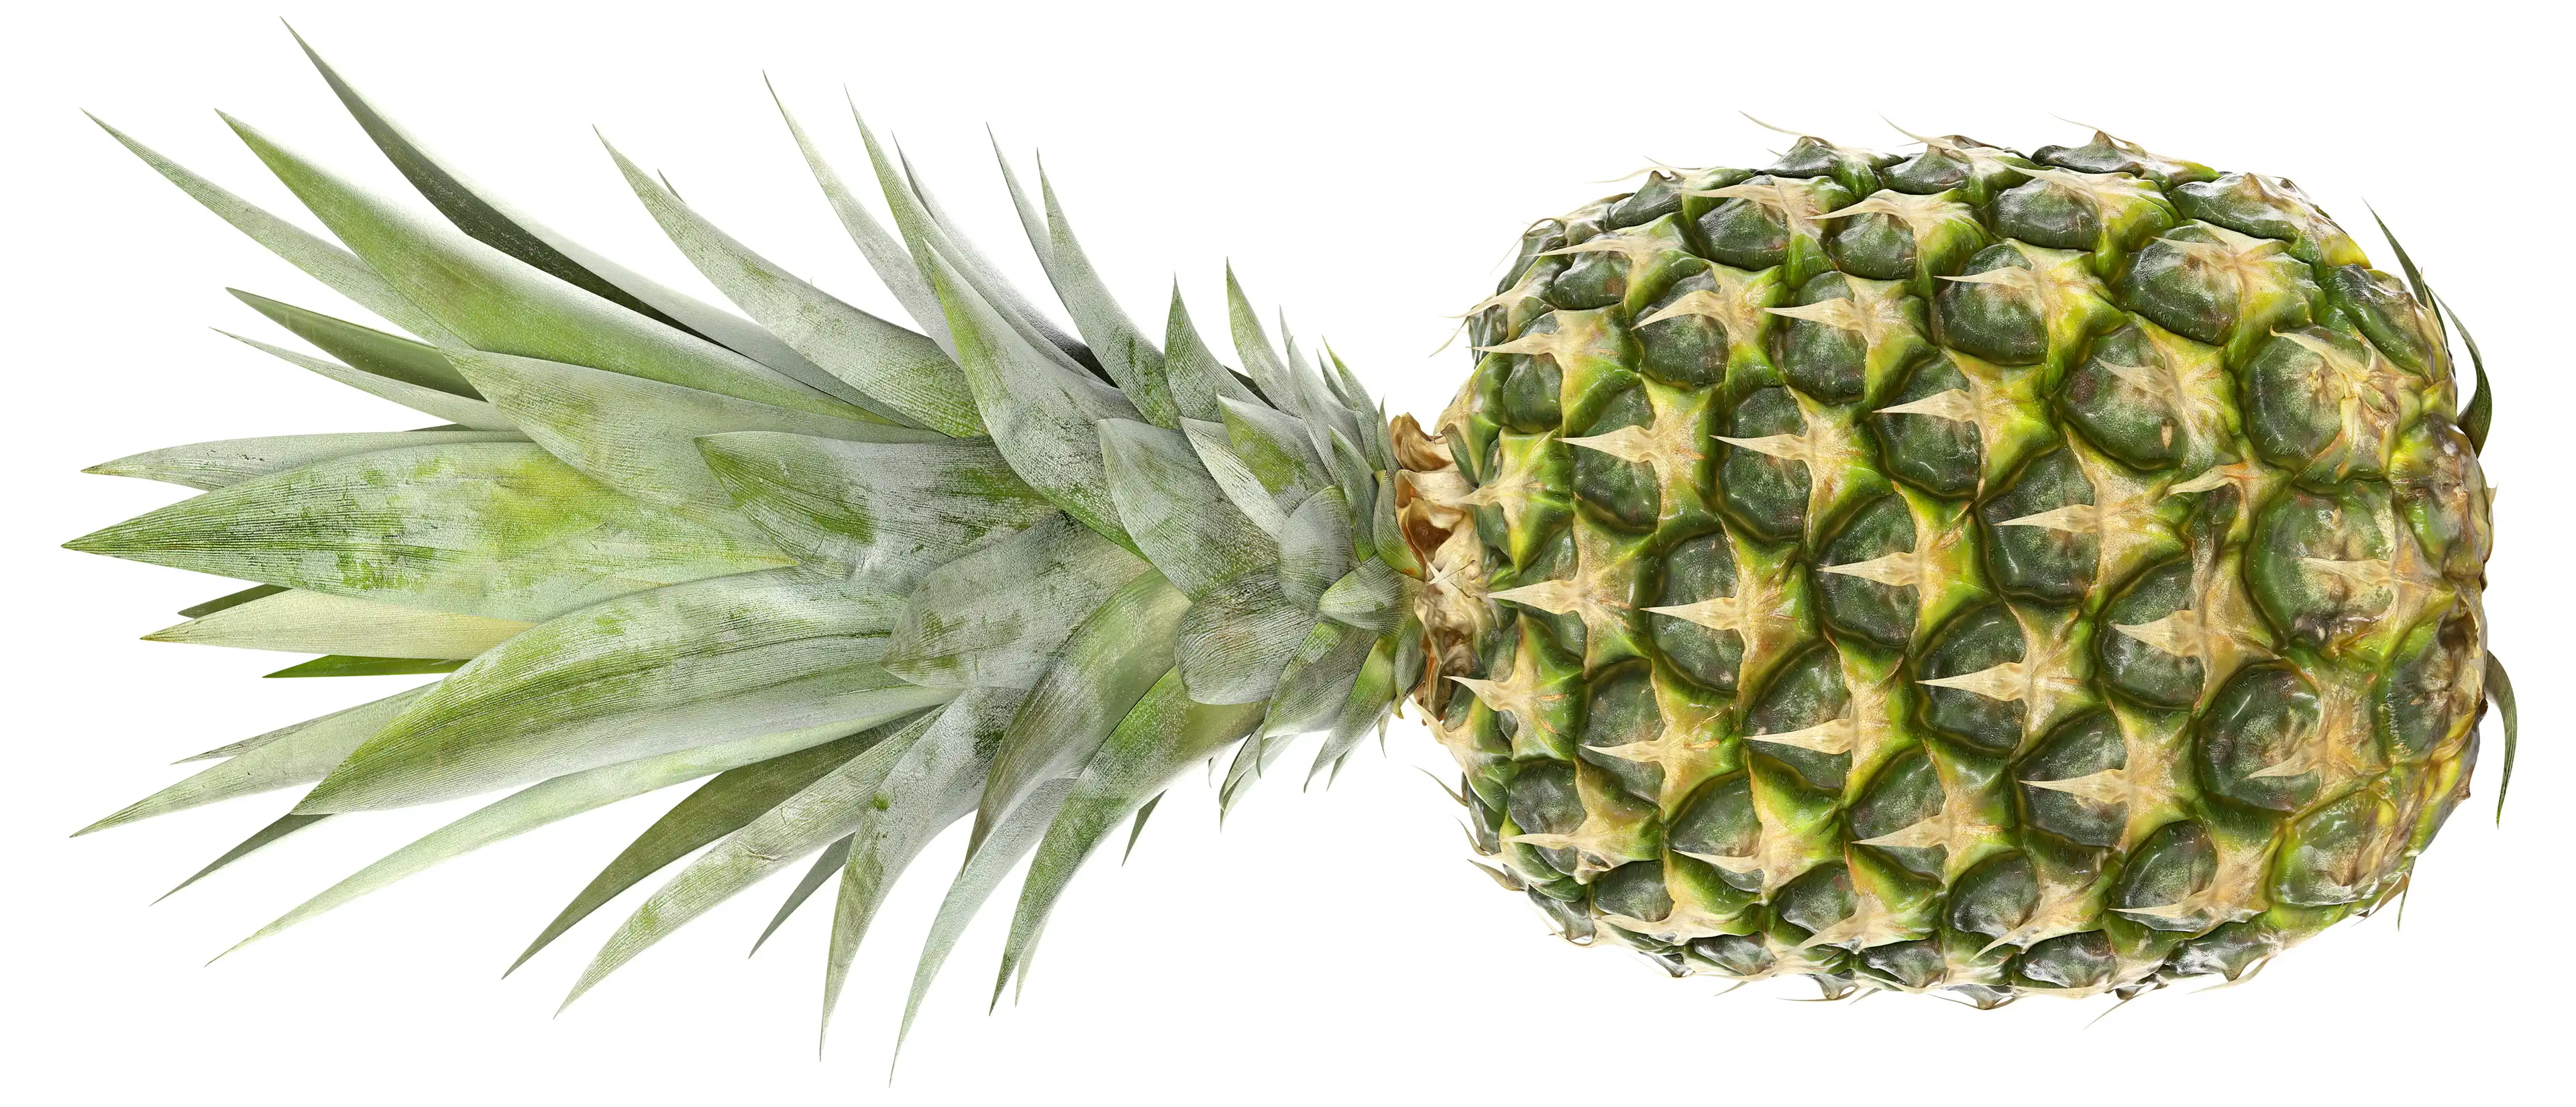 High resolution 4K photo of a whole pineapple on a white background.